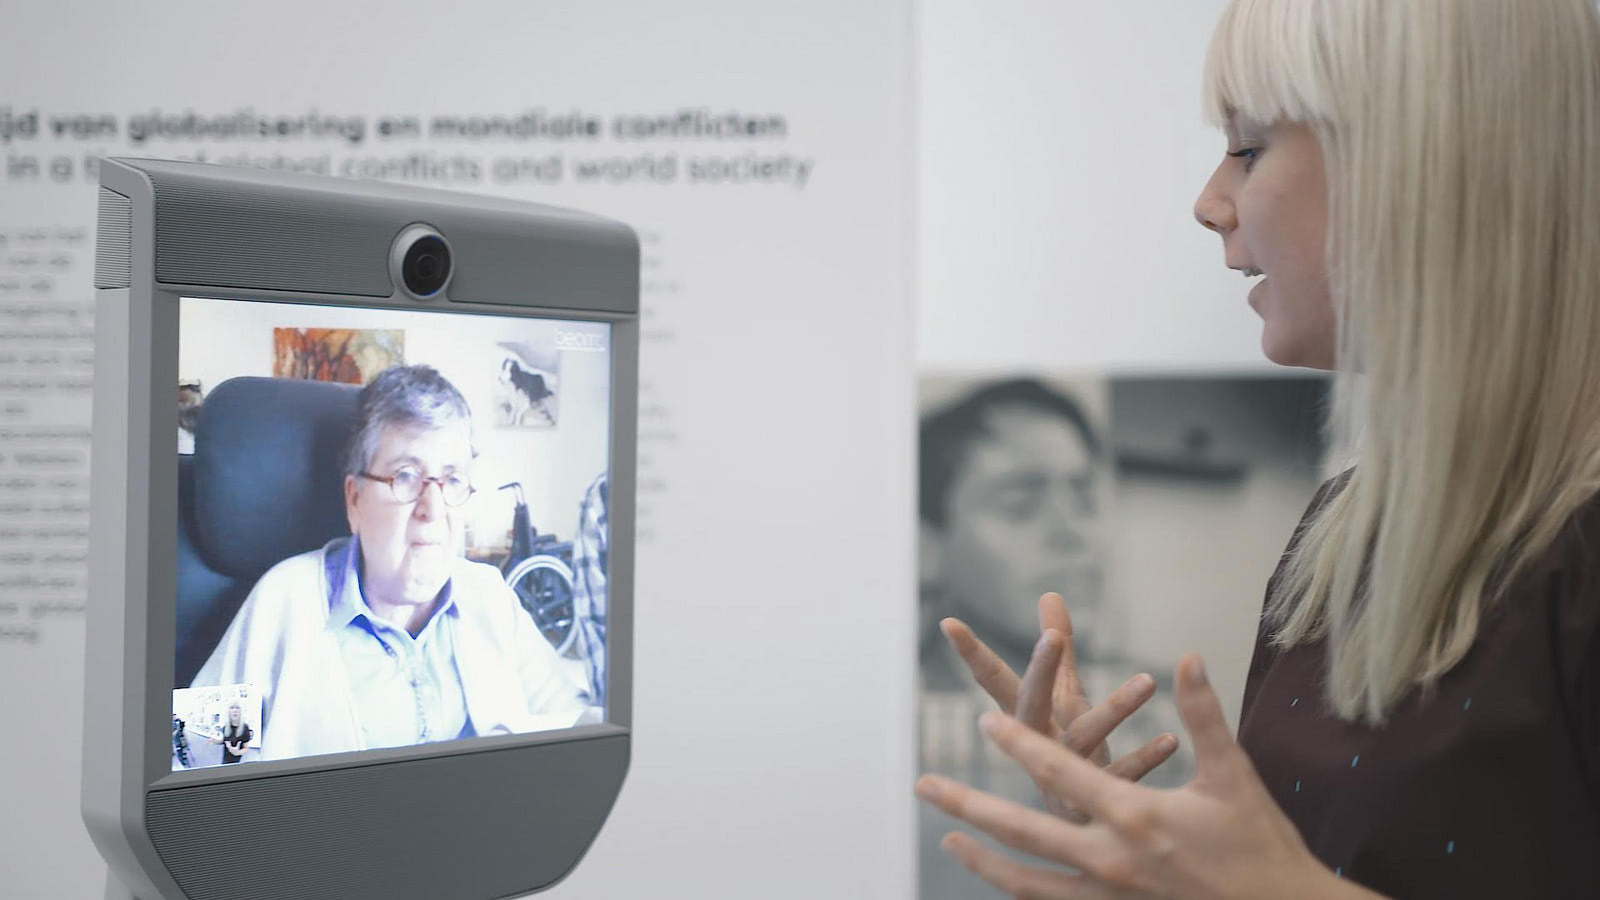 The robotic visitor and marleen hartjes in conversation.